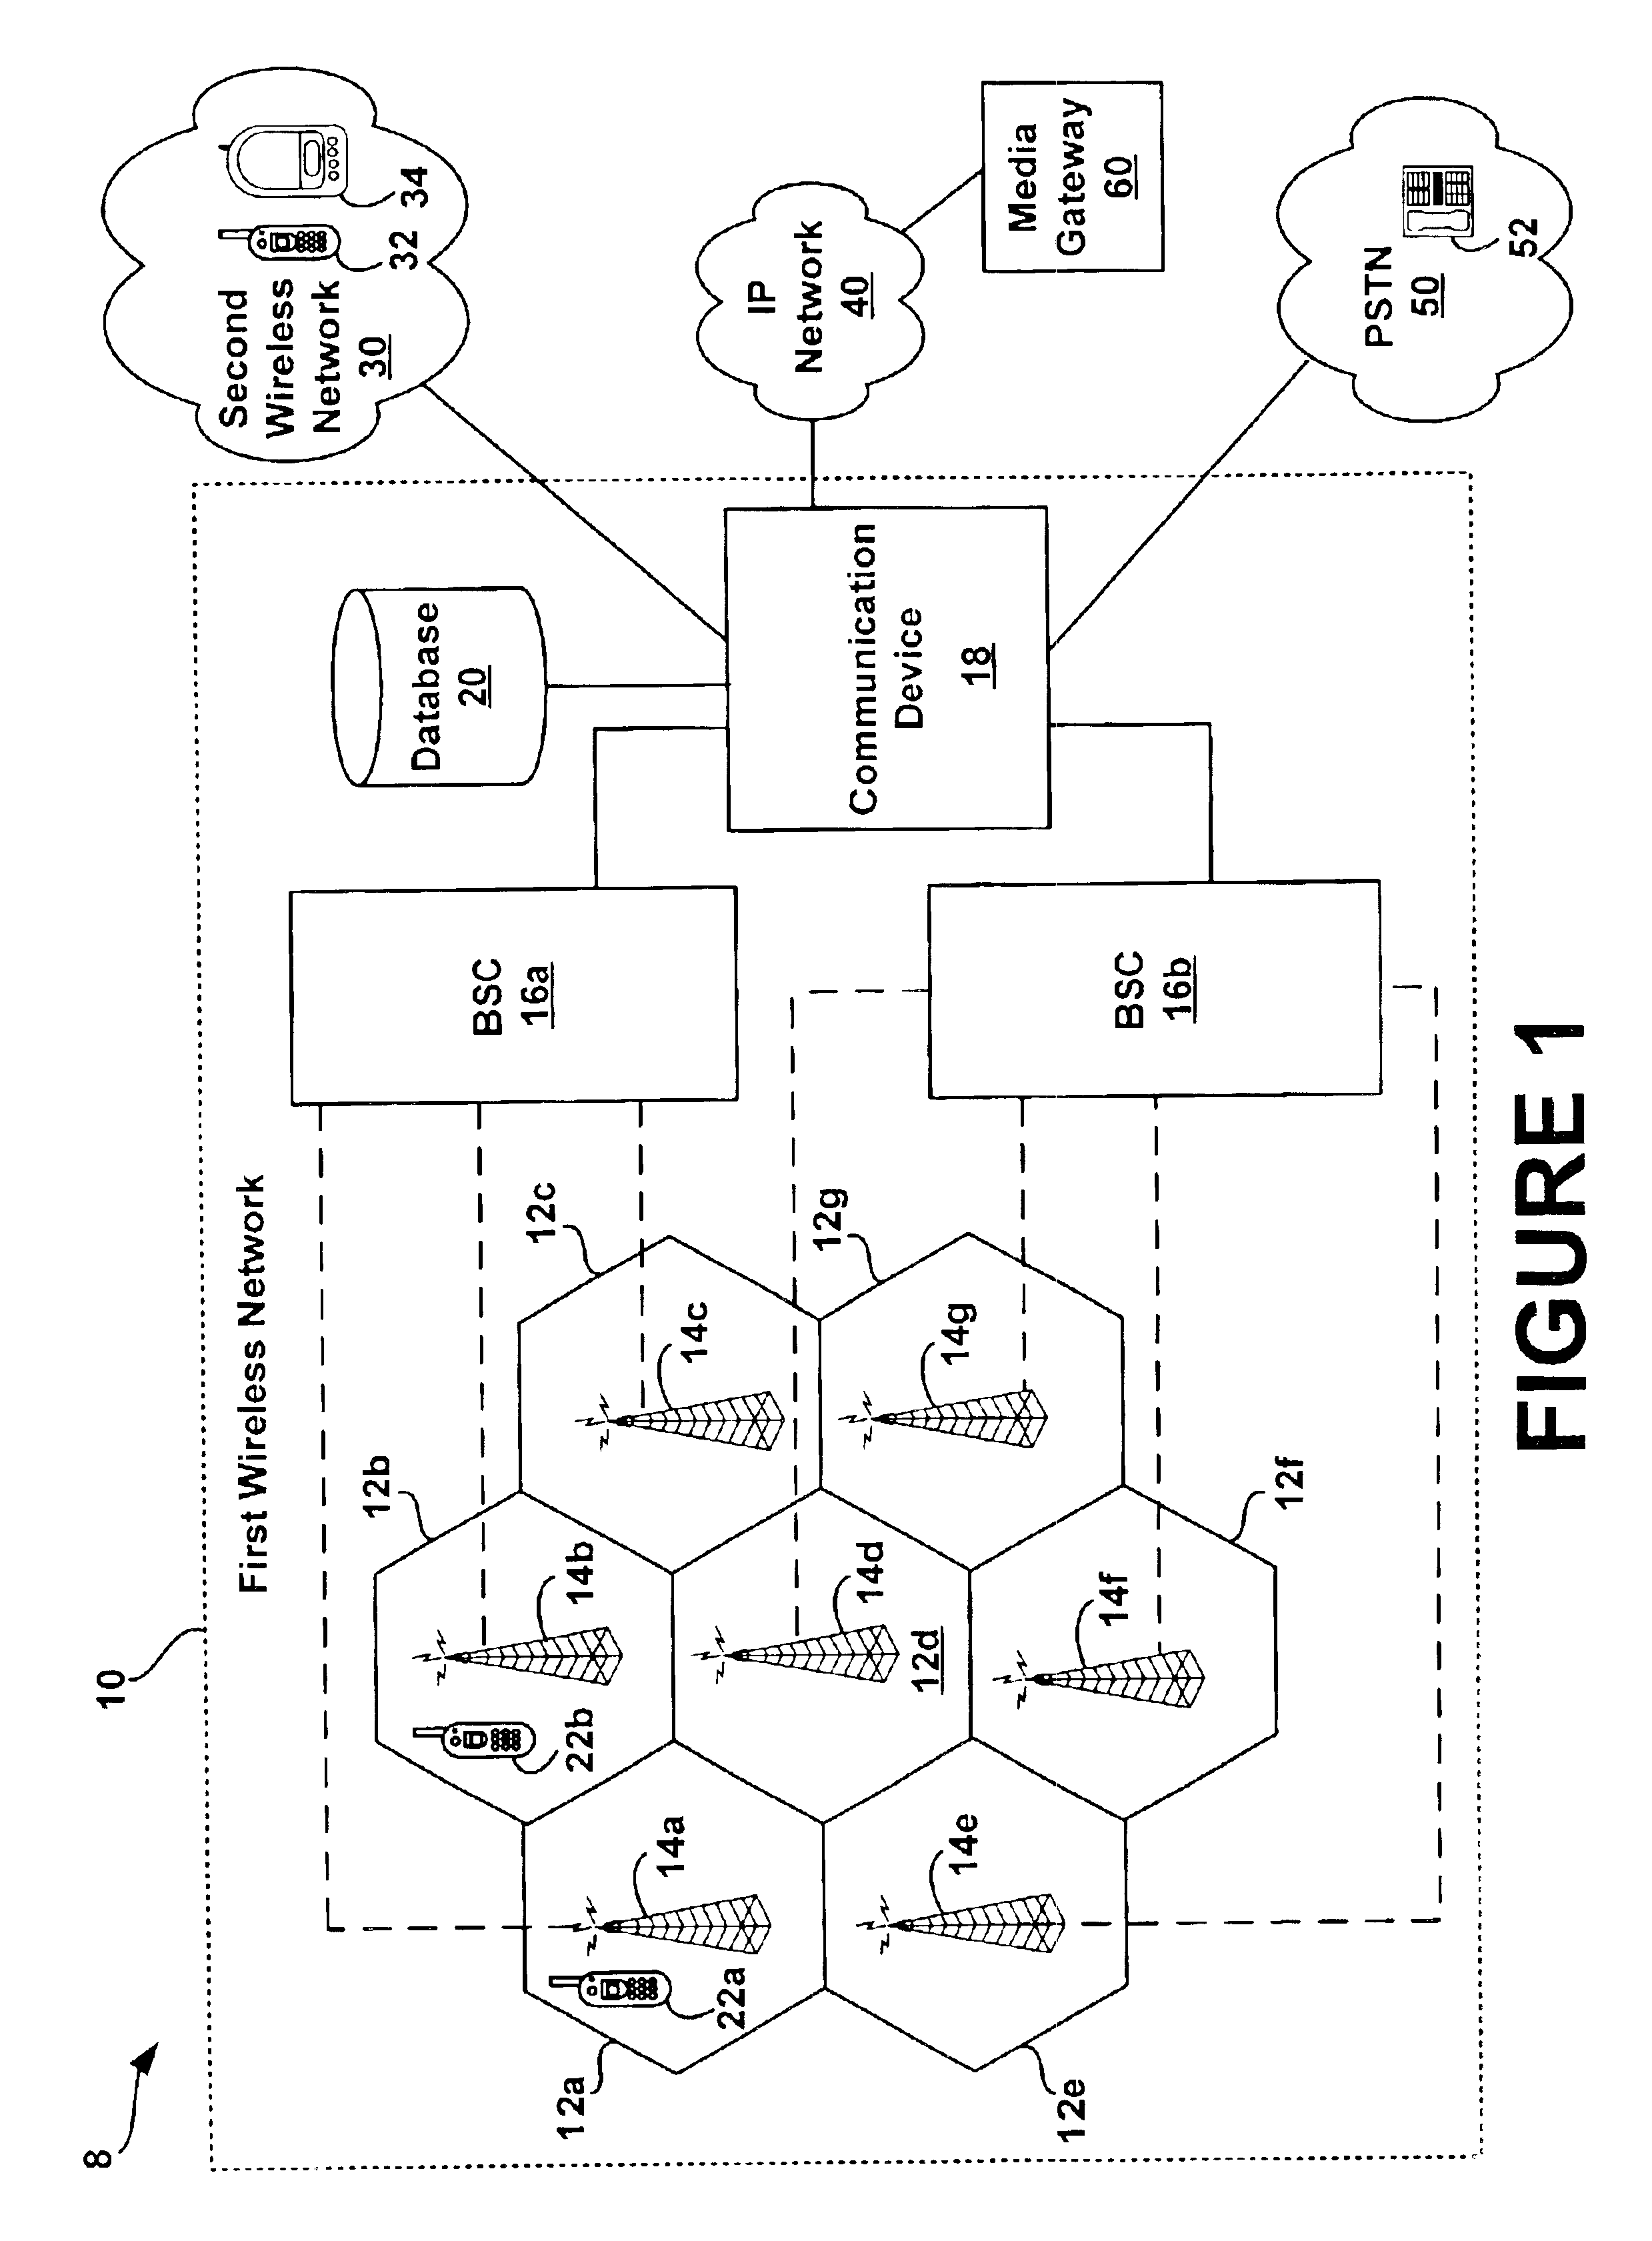 Method and system for vocoder bypass using electronic serial numbers